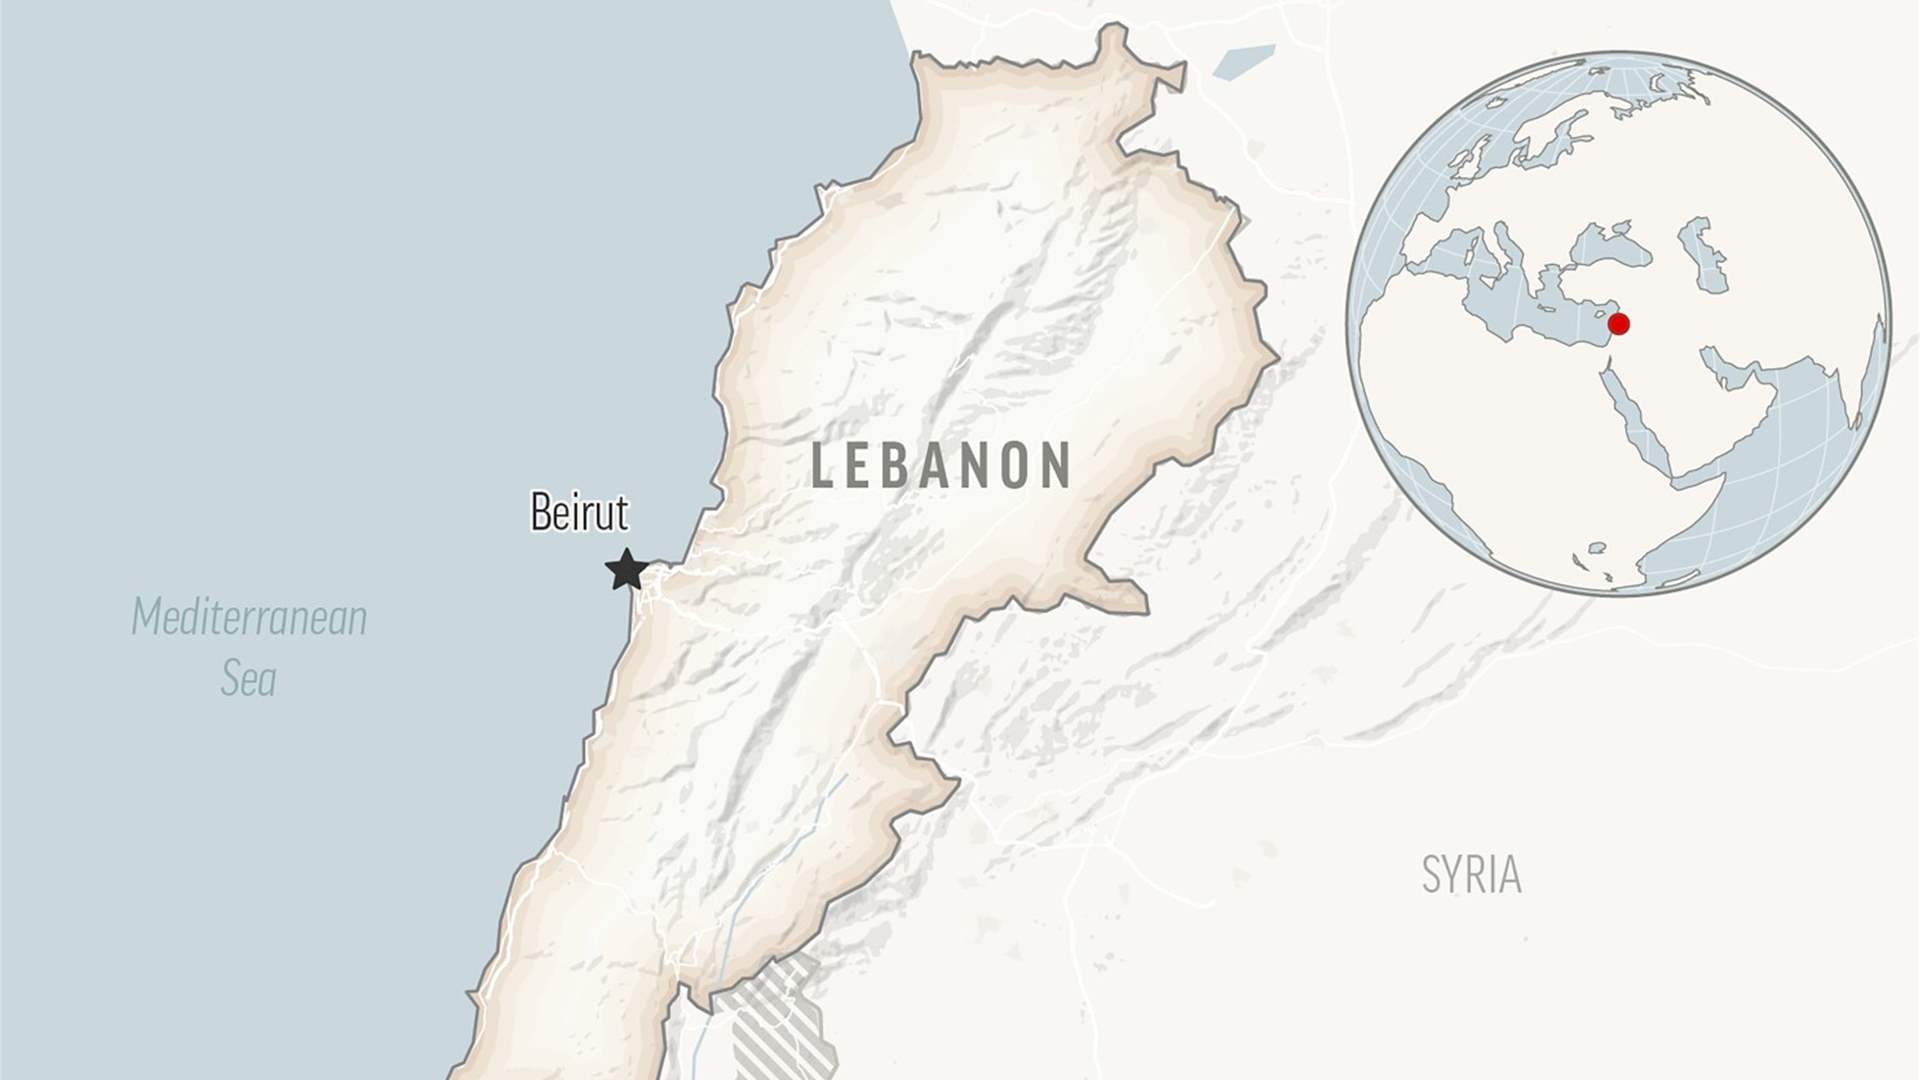 Military official on Lebanese border denies rocket launch from Lebanon, attributes incident to mine explosion